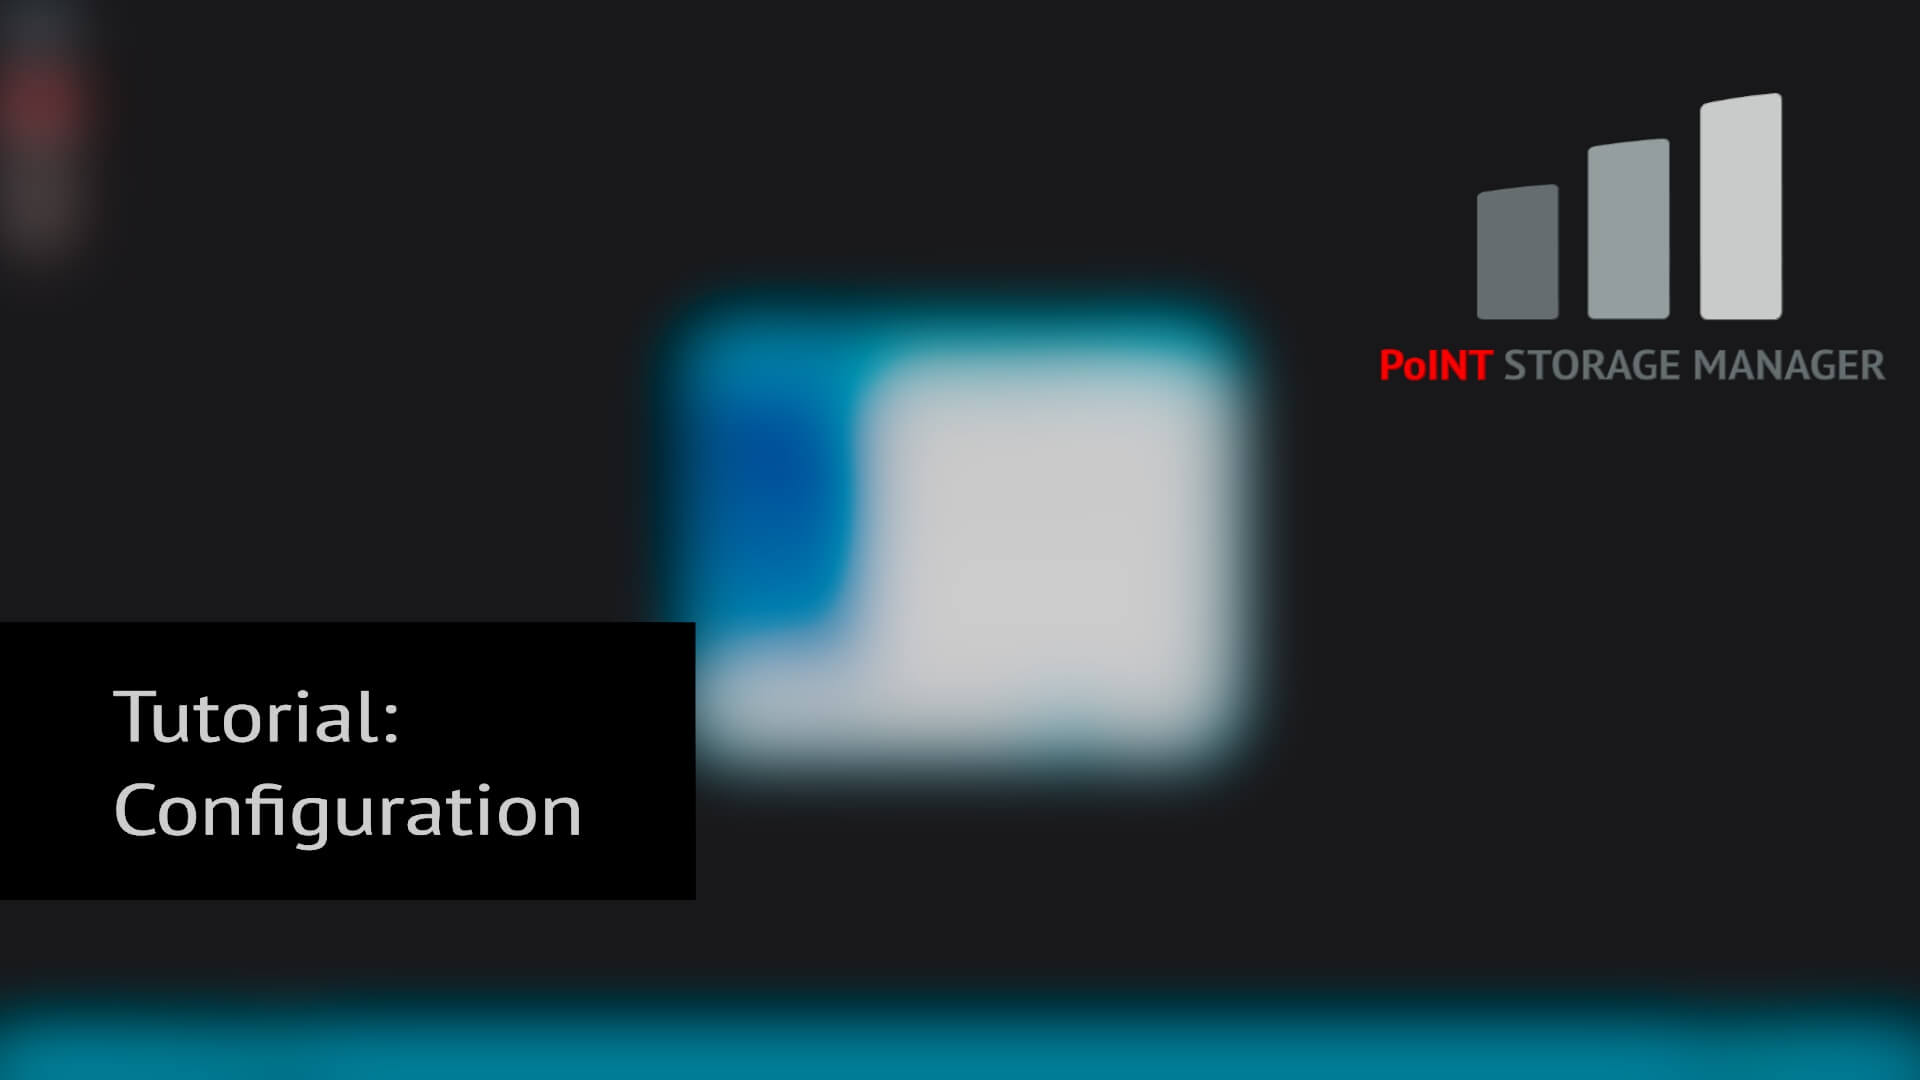 On a black background gleams the first picture of a tutorial for the PoINT Storage Manager. The tutorial helps with the configuration such as the PoINT Storage Manager itself helps with information lifecycle management.